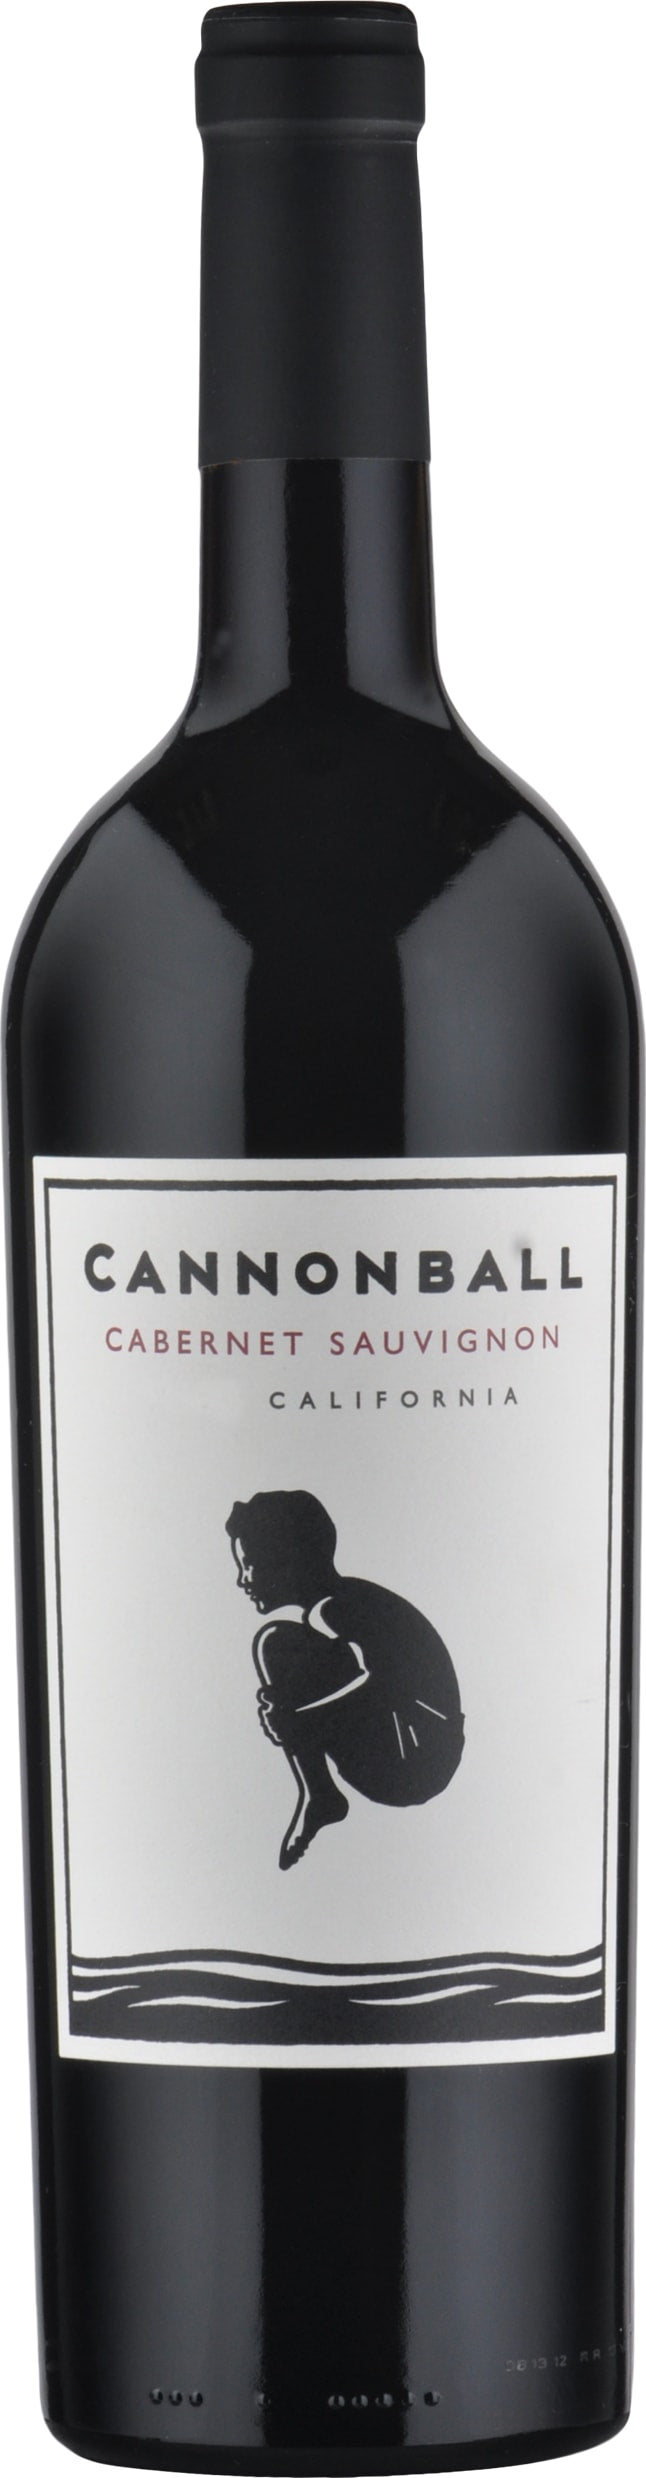 Cannonball Cabernet Sauvignon 2020 75cl - Buy Cannonball Wines from GREAT WINES DIRECT wine shop